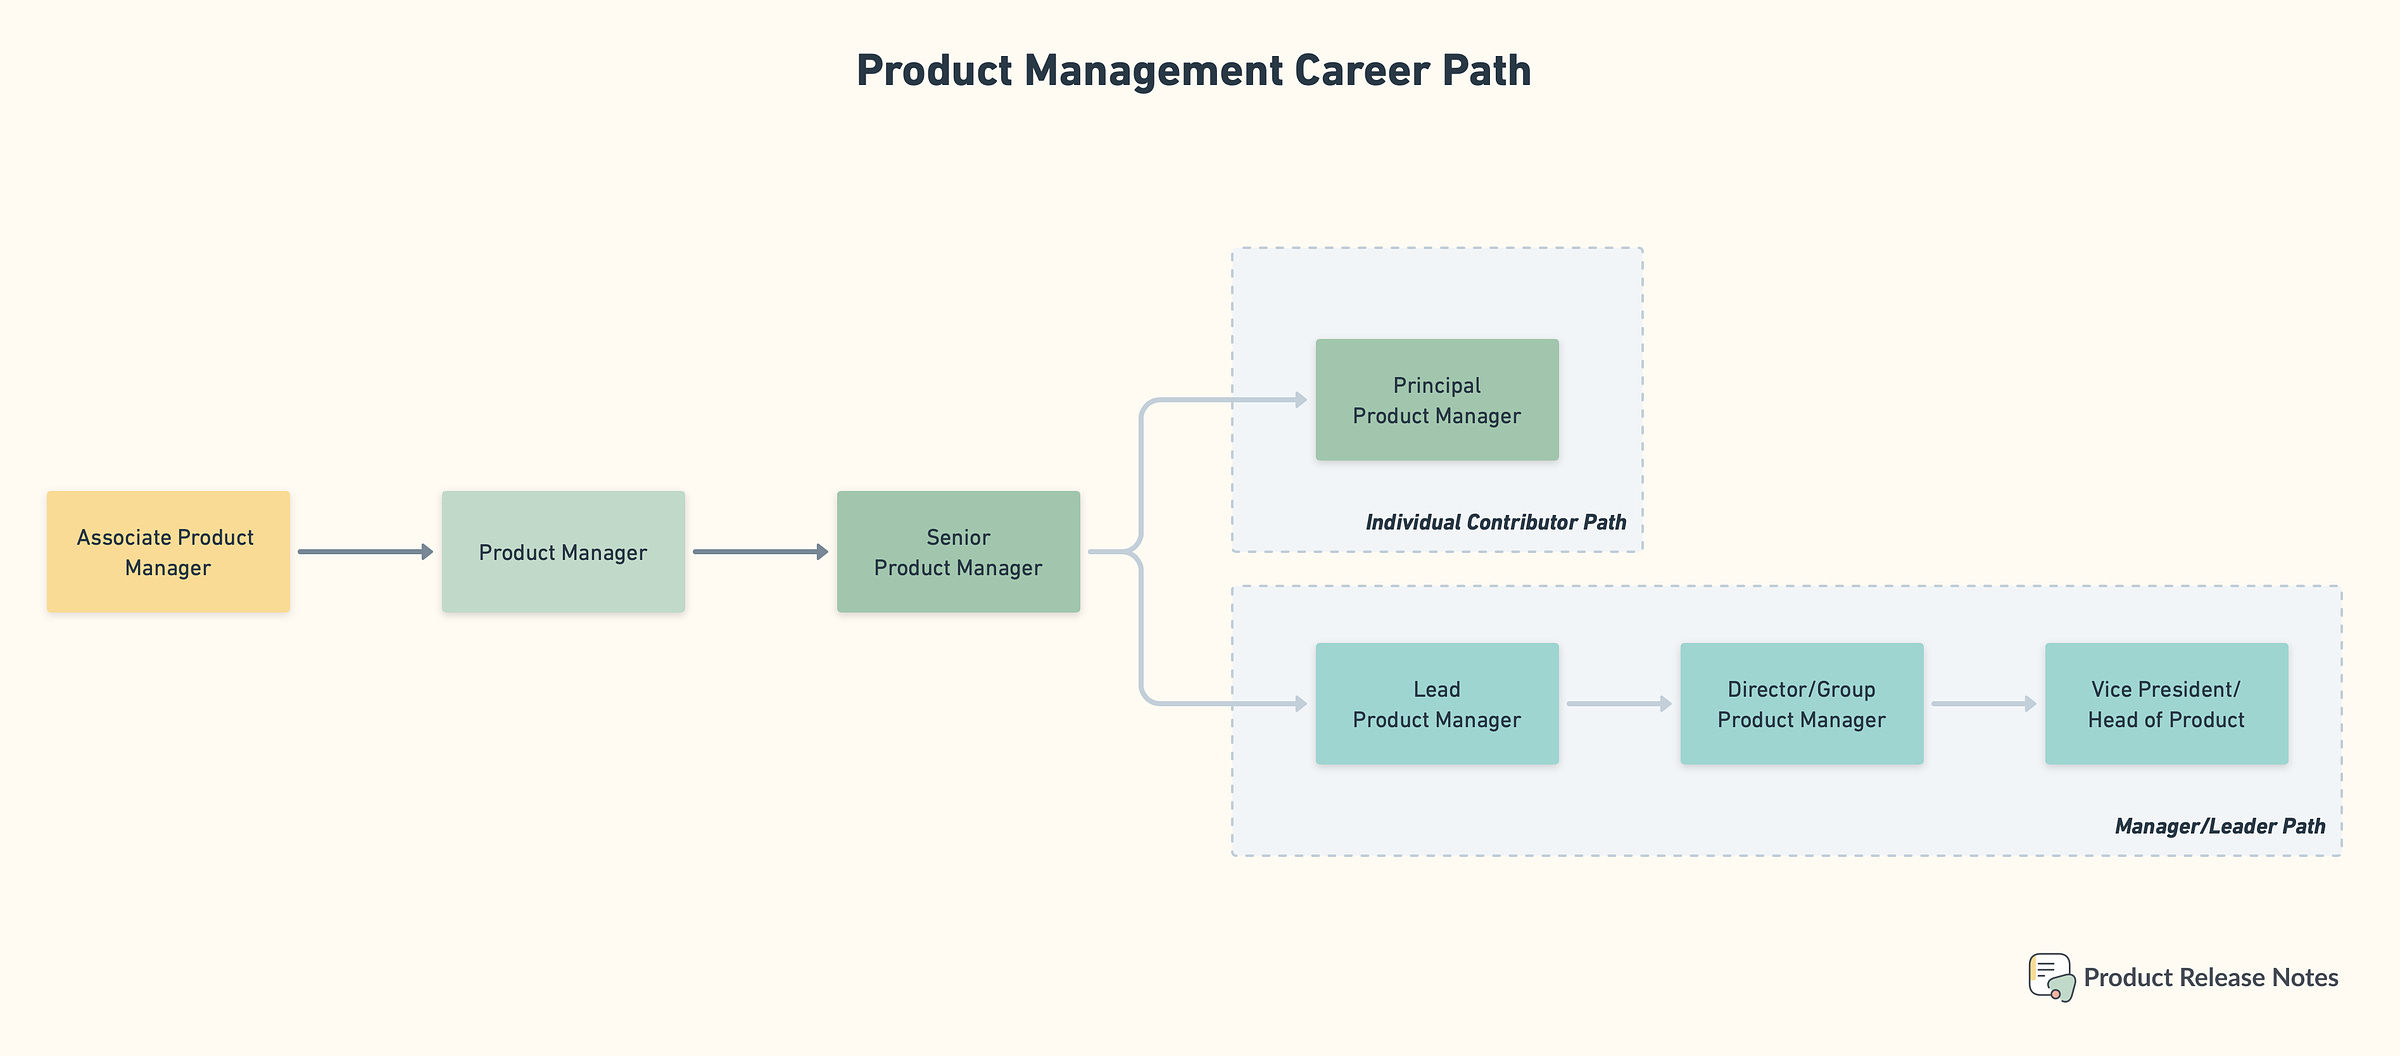 Graph with the most common Product Management positions by Product Release Notes